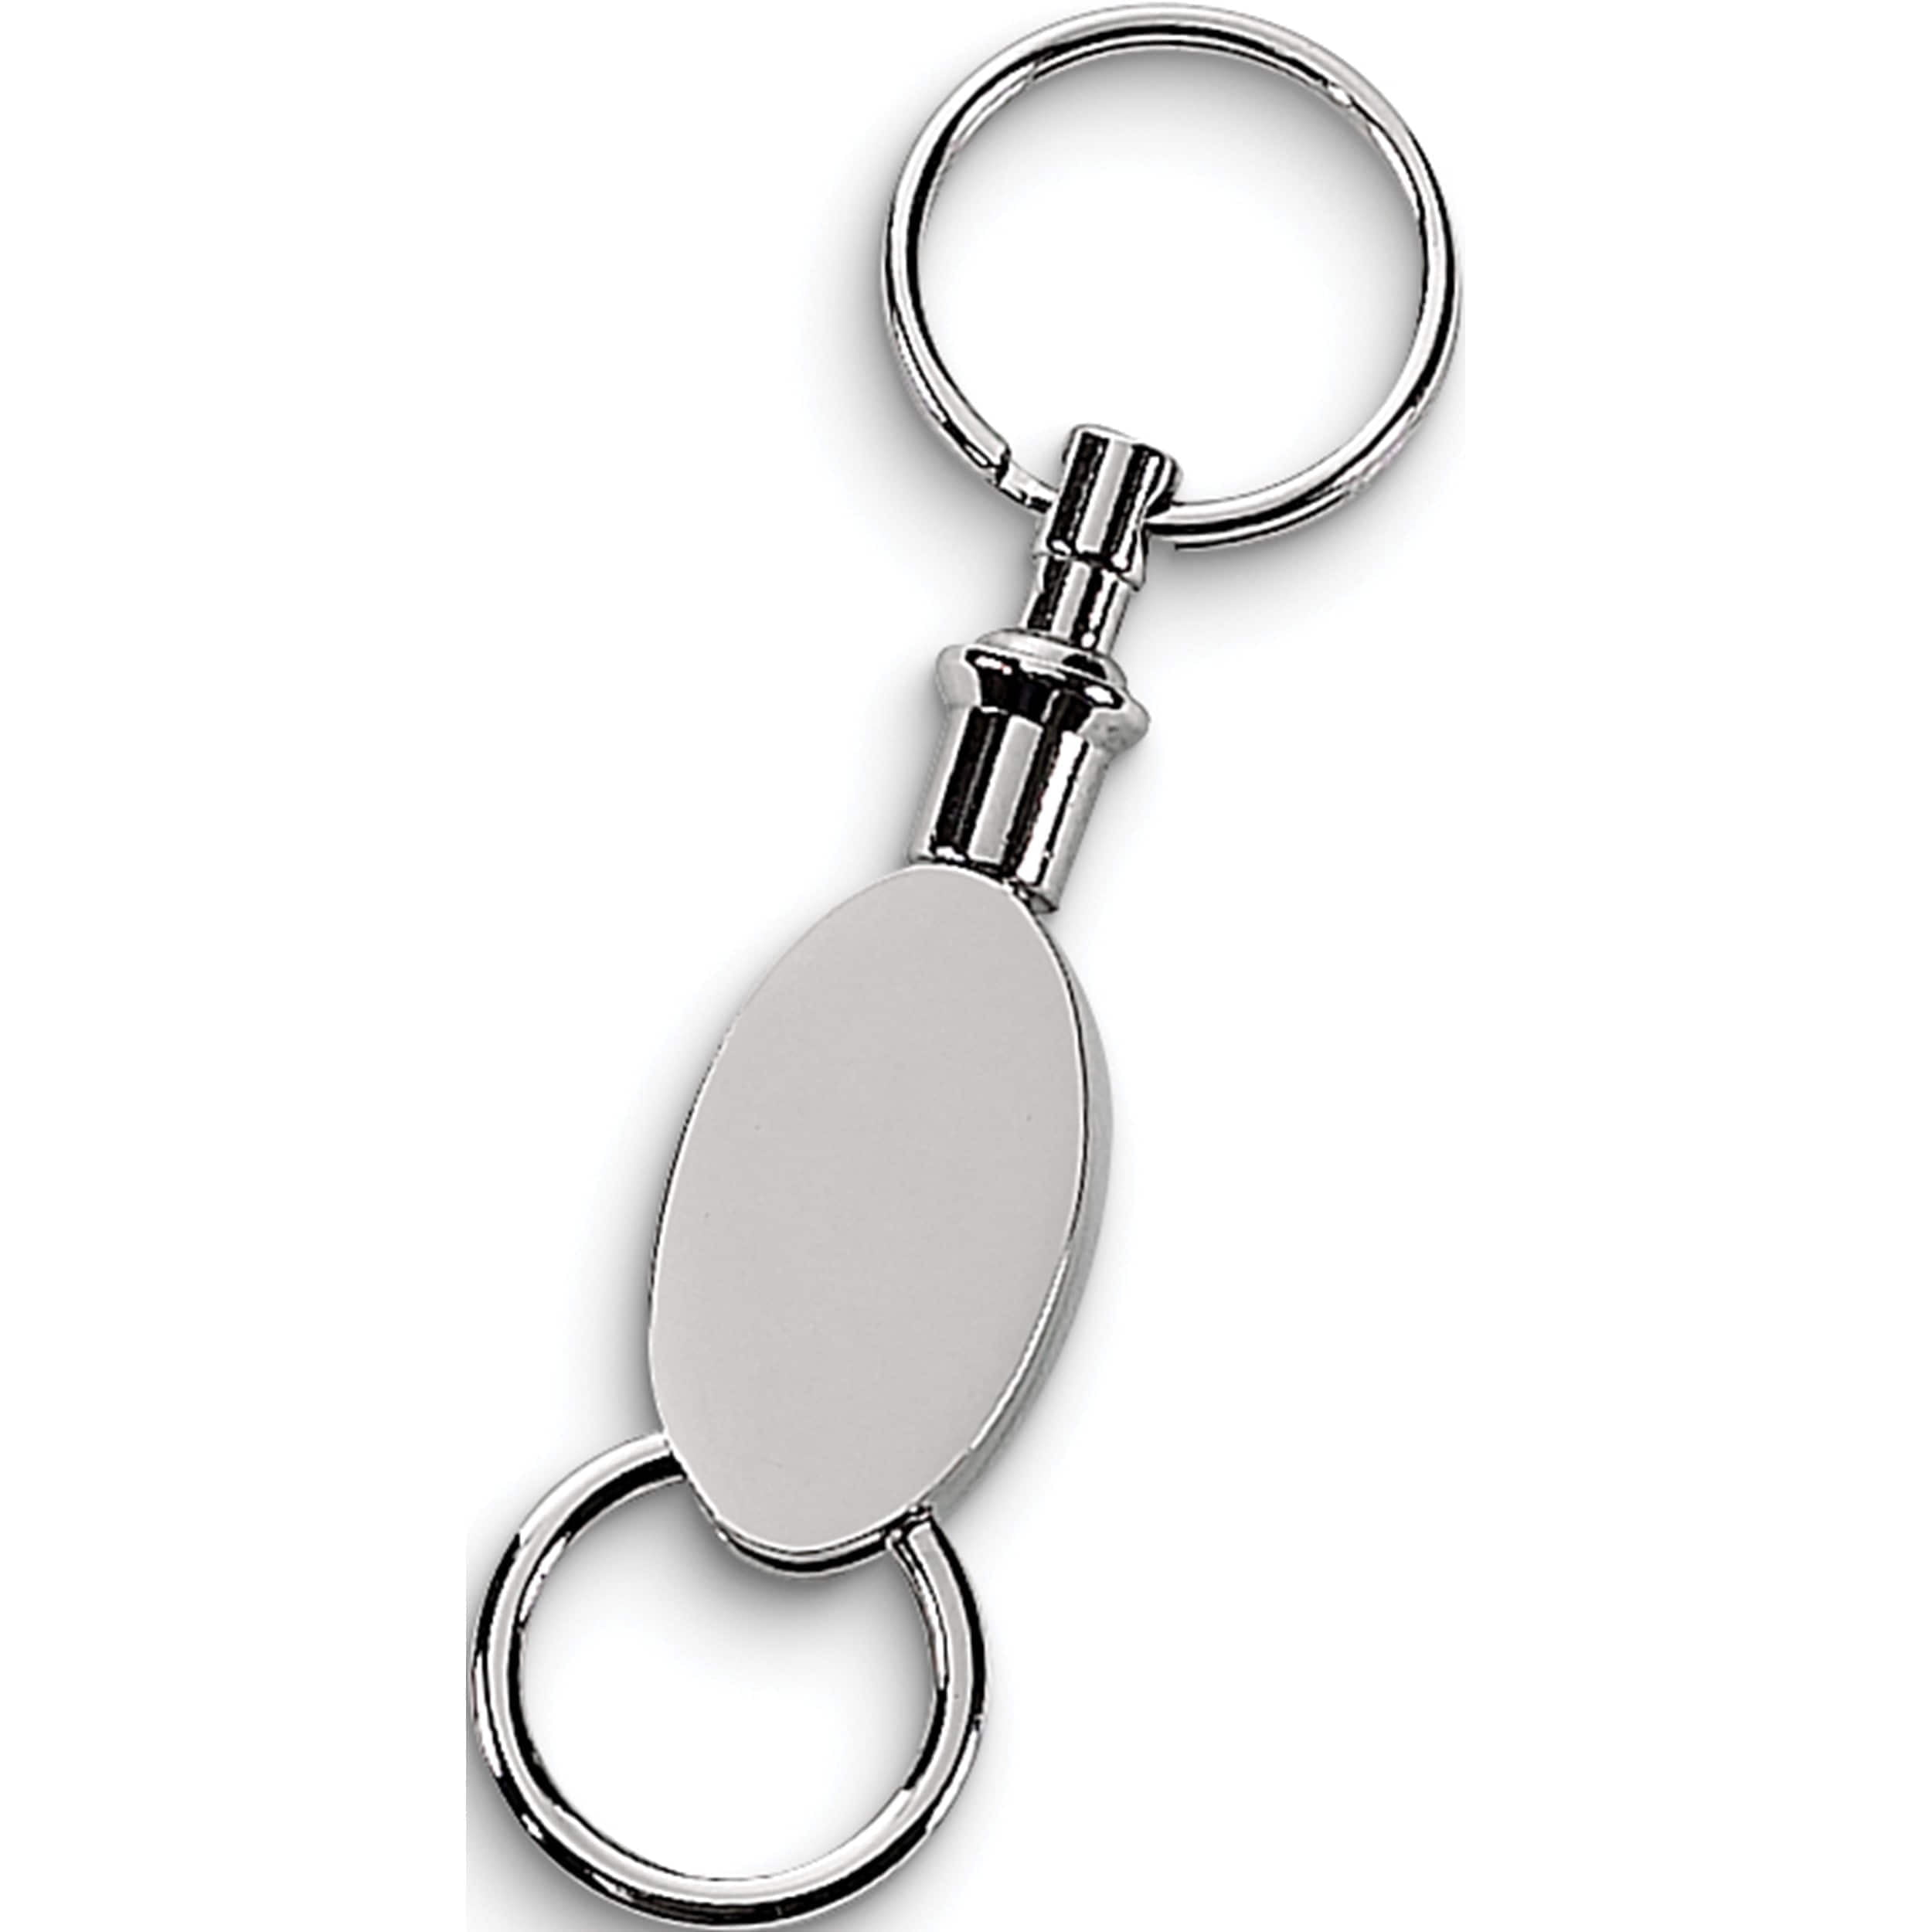 Baumgartens 2 in 1 Key Ring Chain Keyring 68700  separates easily into 2 rings 